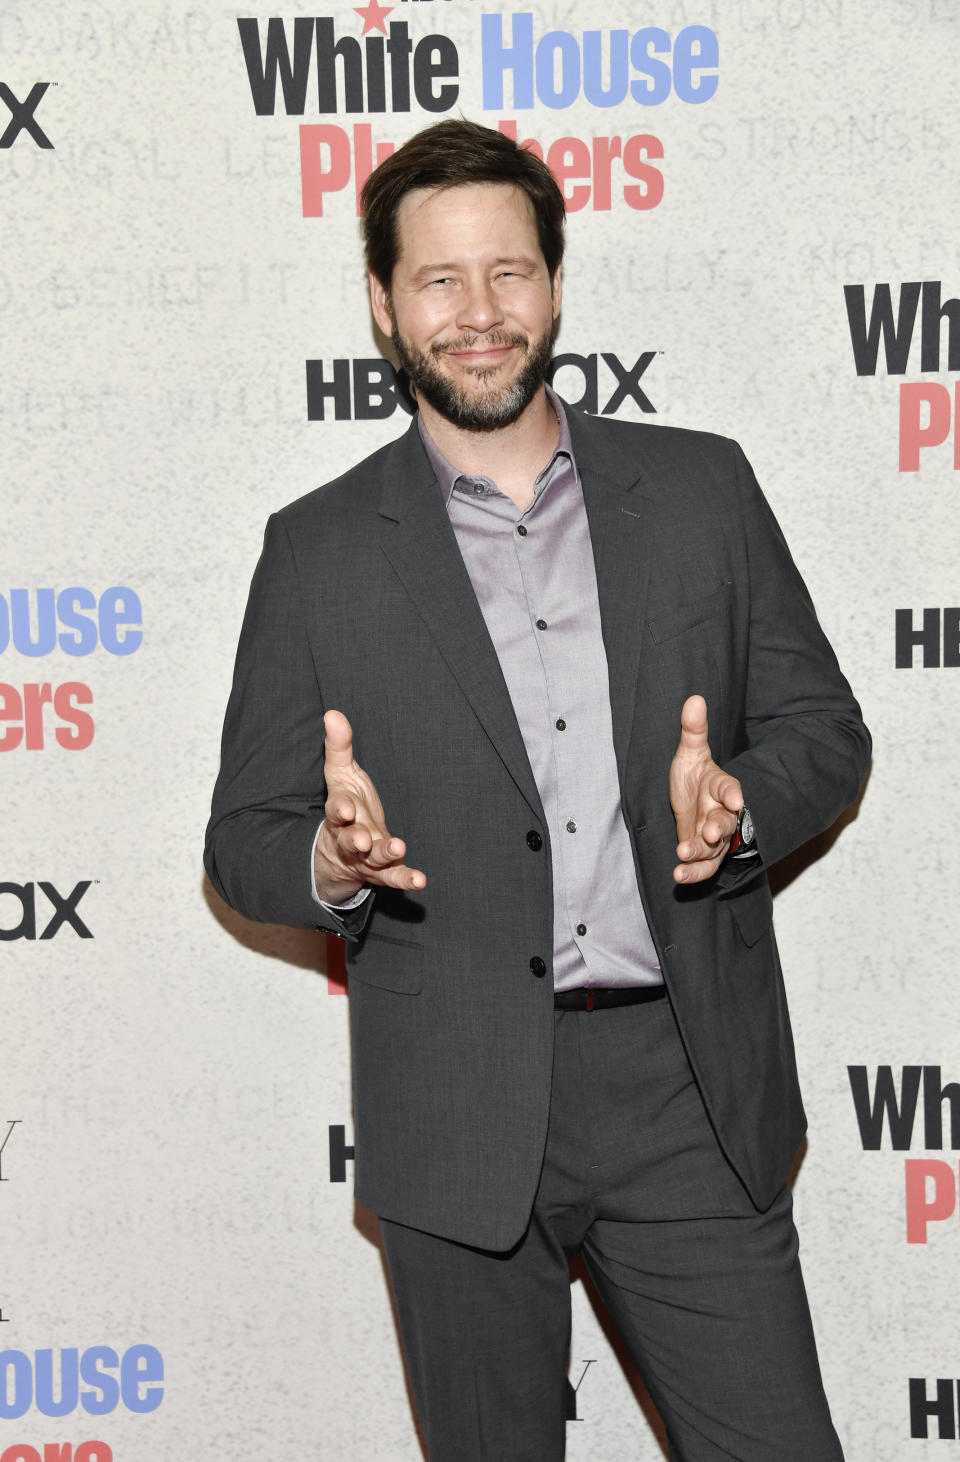 Ike Barinholtz attends the premiere of HBO's "White House Plumbers," at the 92nd Street Y, Monday, April 17, 2023, in New York. (Photo by Evan Agostini/Invision/AP)